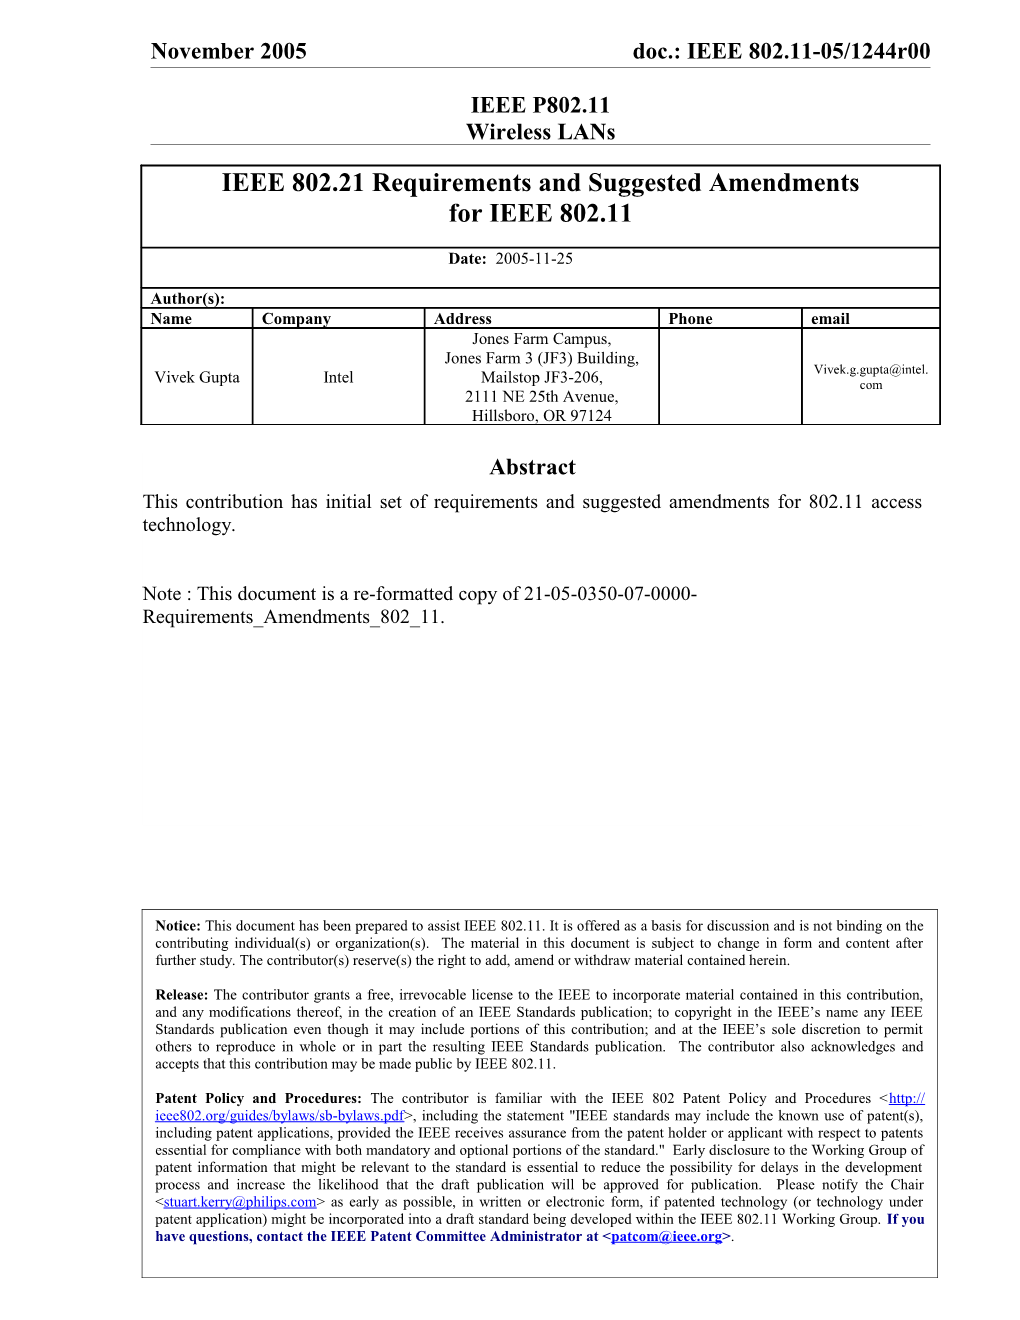 IEEE 802.21 Requirements and Suggested Amendments for IEEE 802.11